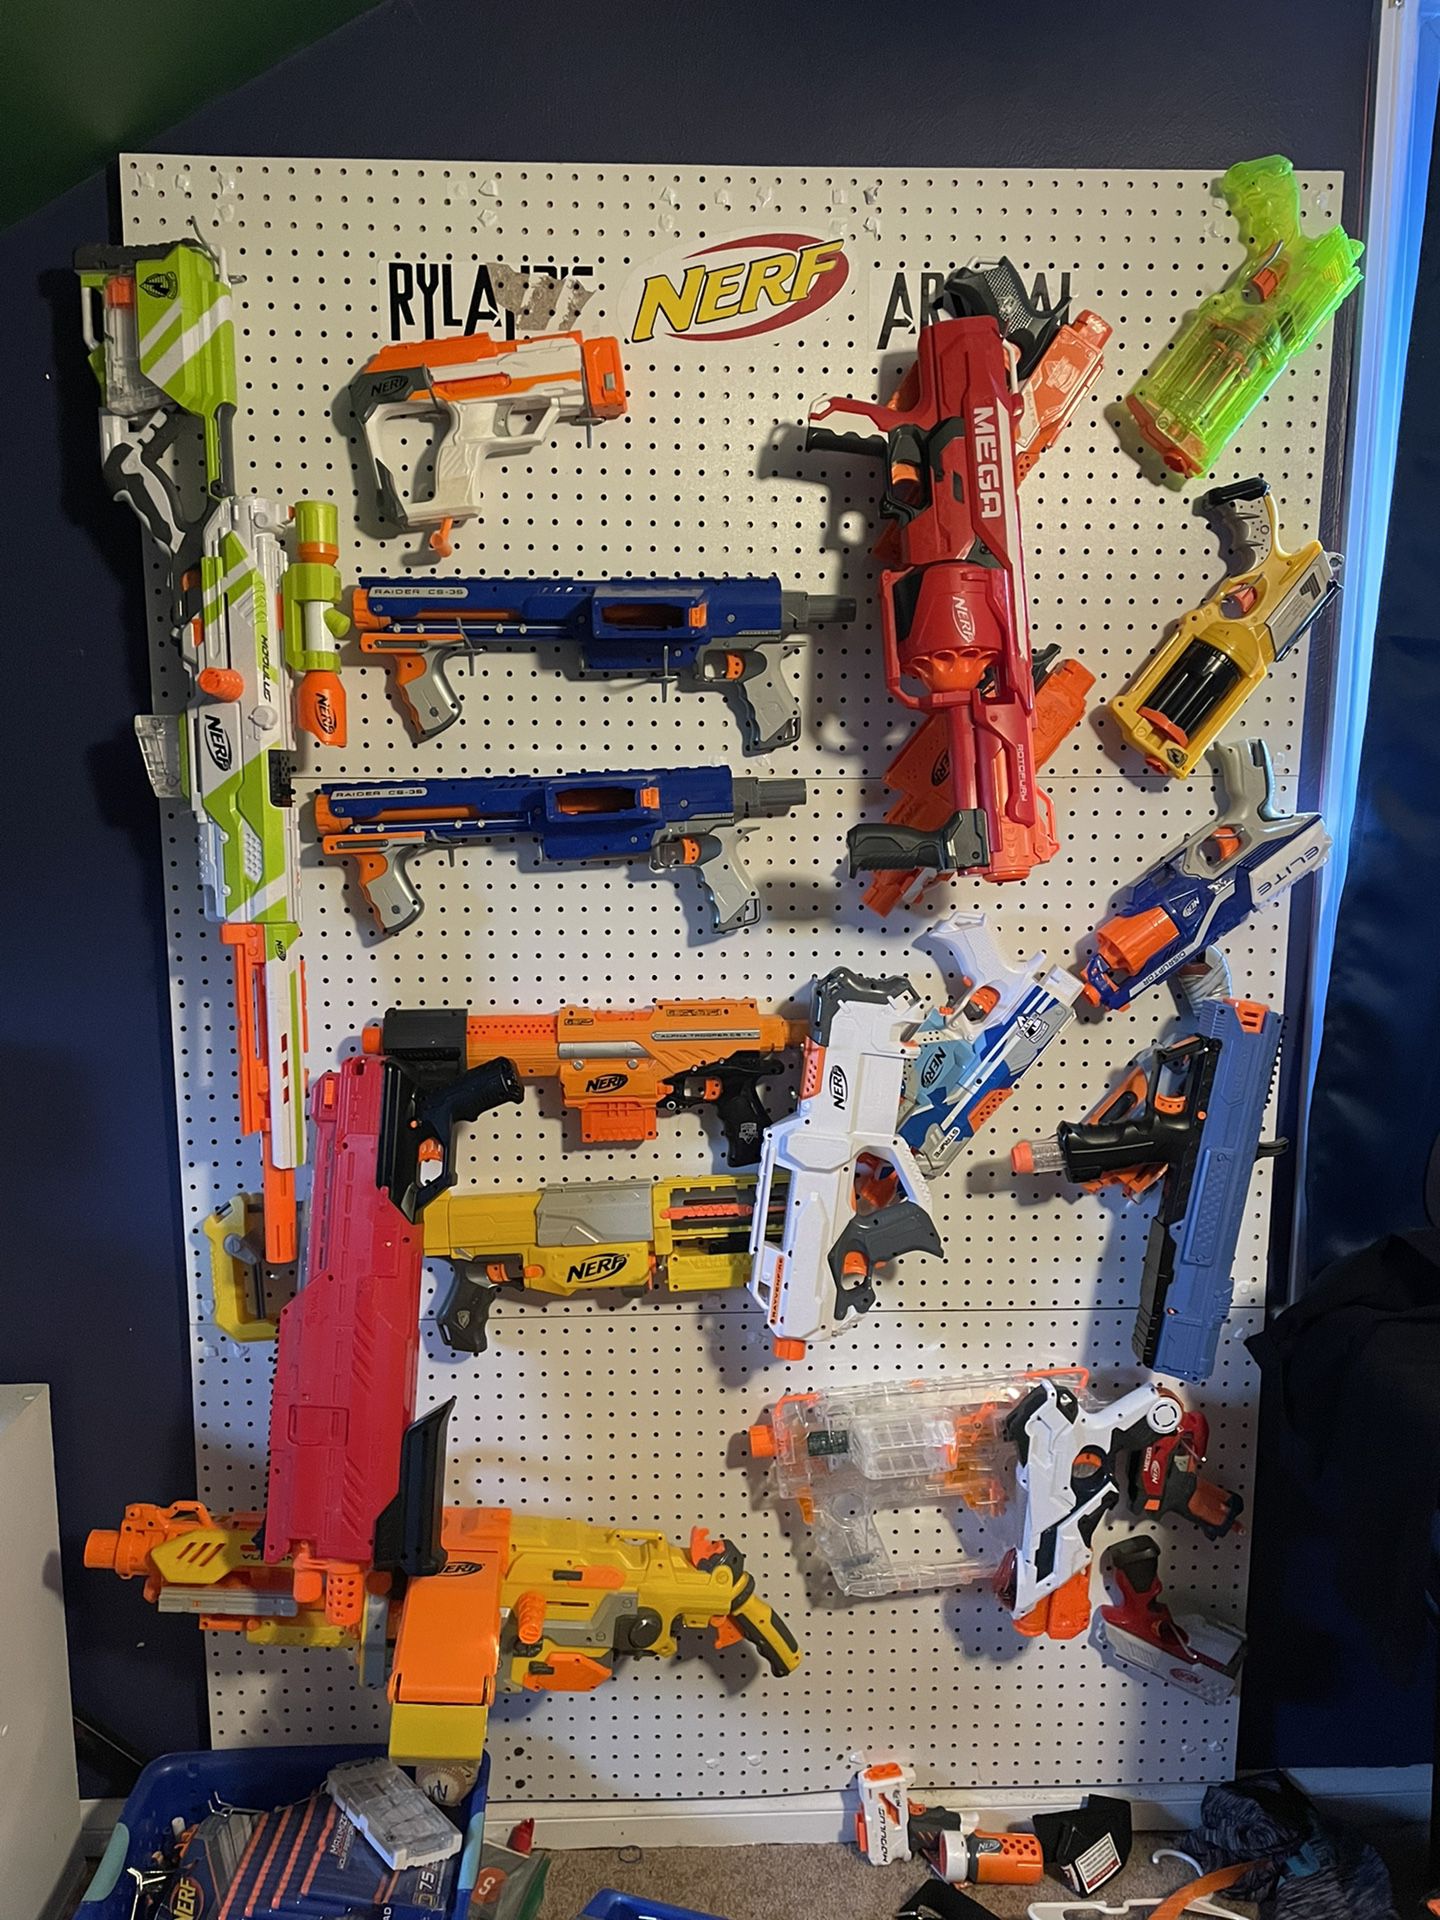 25+Nerf Guns- Includes wall mount & Inflatable  Obstacles